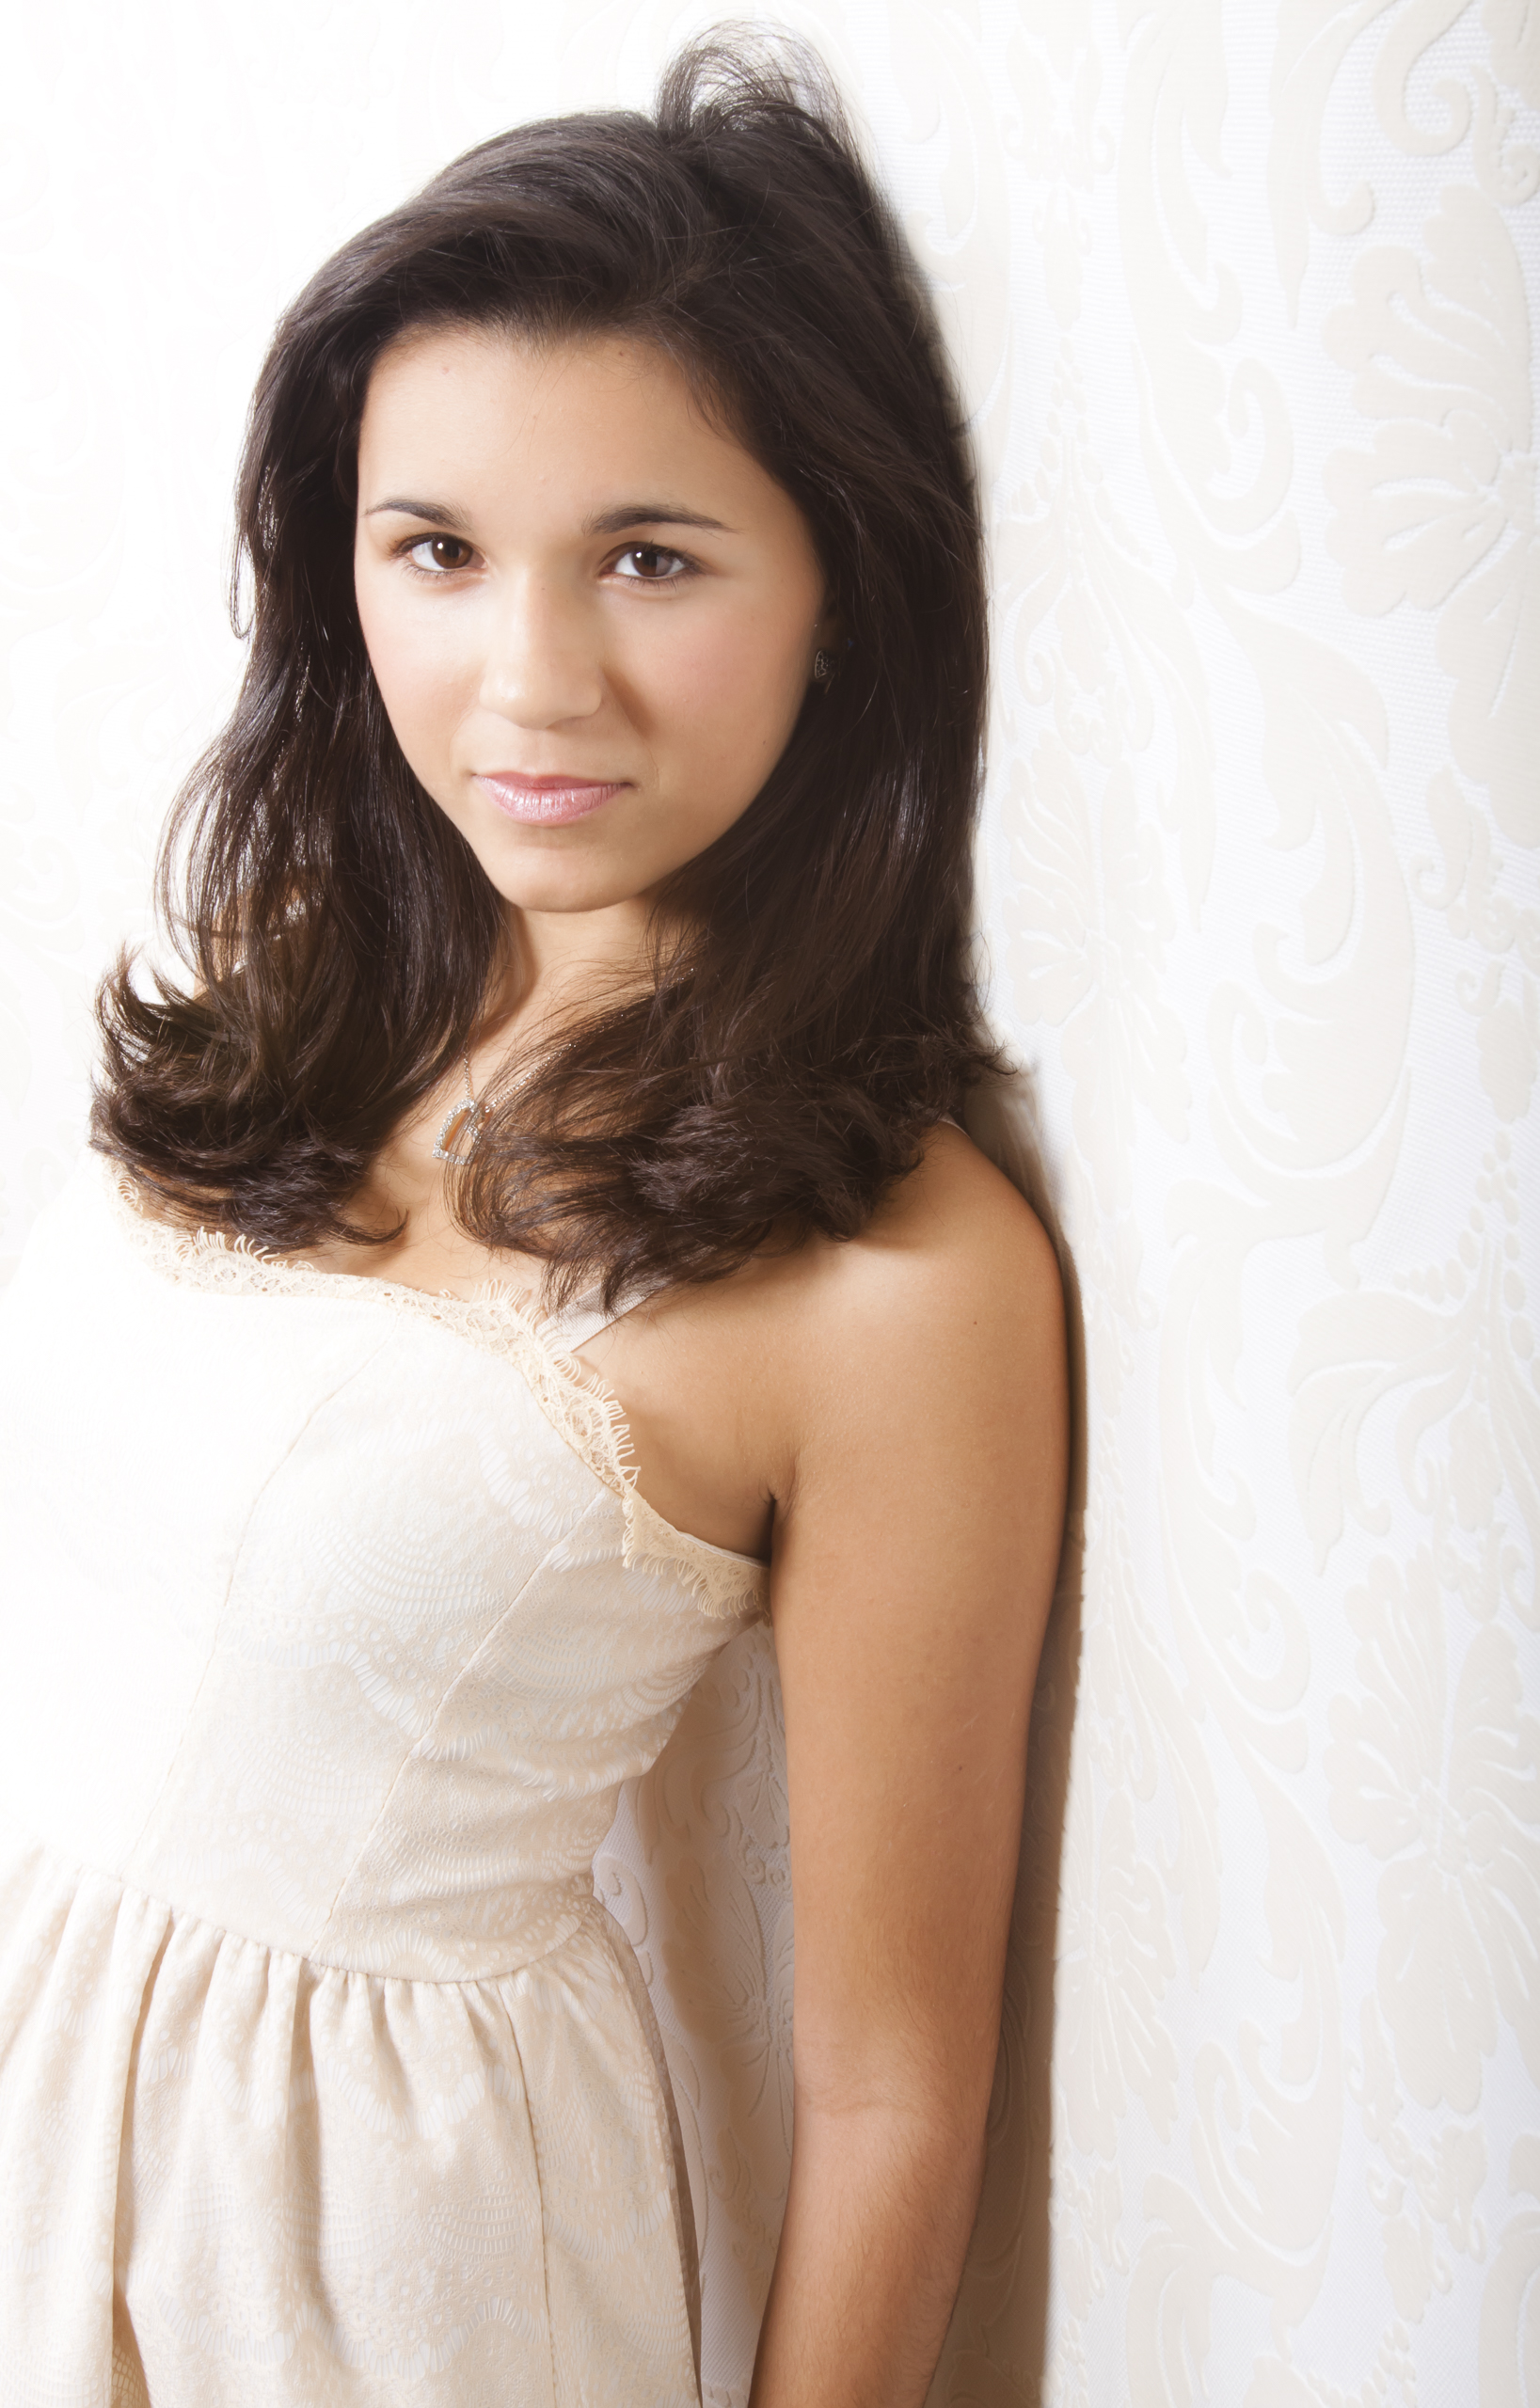 06 modern styled senior portrait sessions in white lace dress leaning on wall 8546.jpg